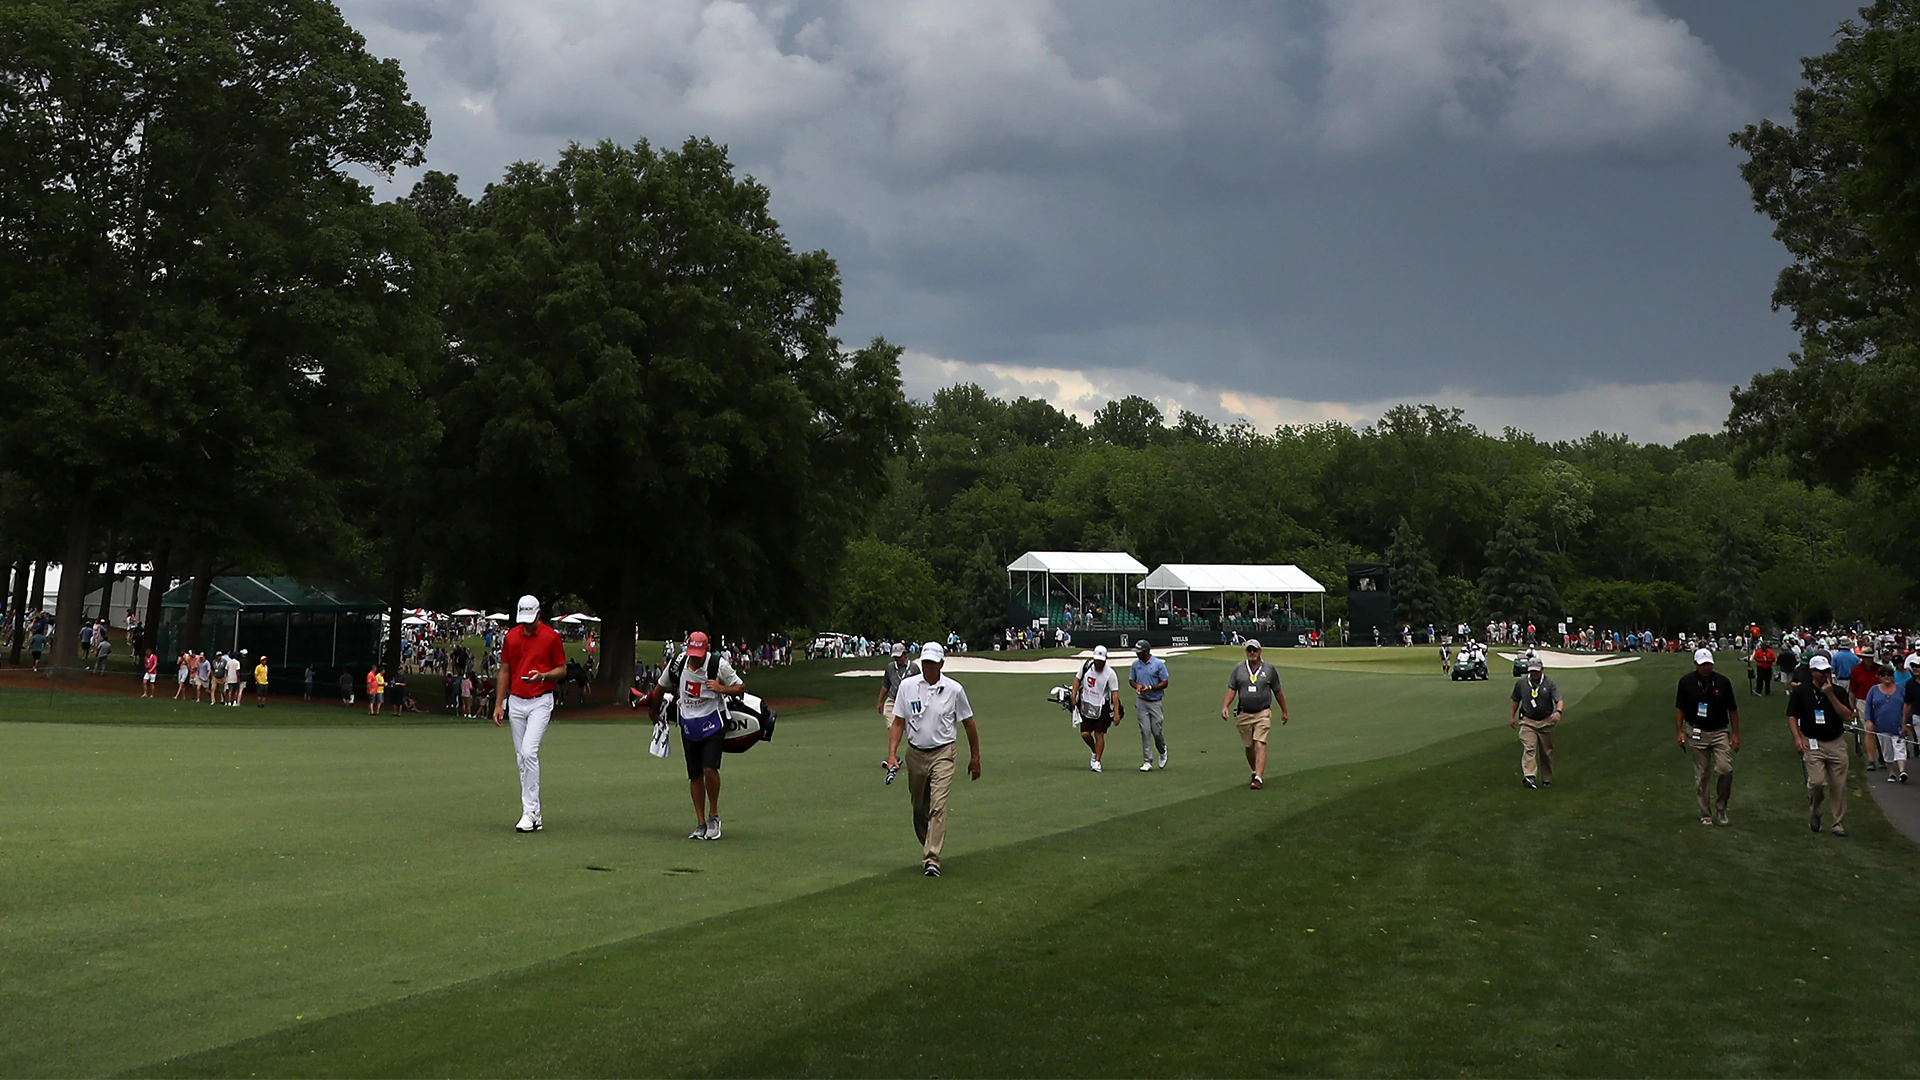 Play resumed after two weather delays at Wells Fargo